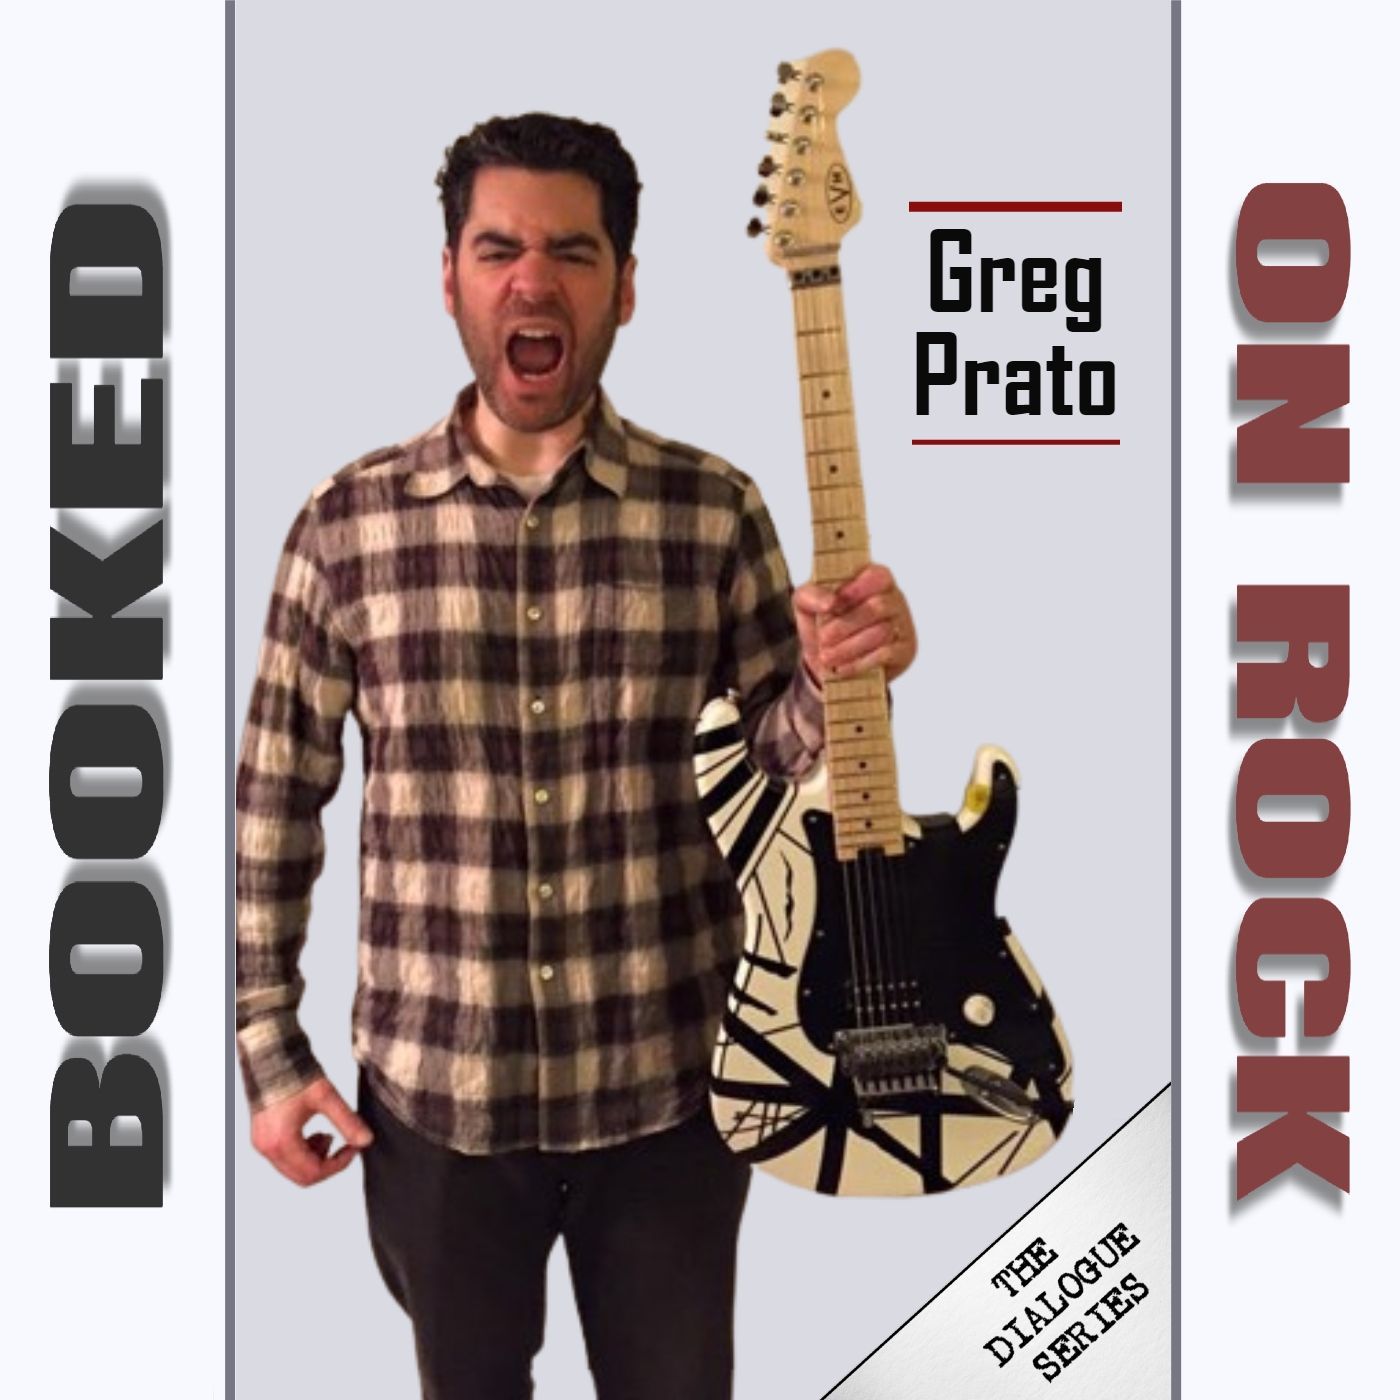 The 10 Albums We Can't Live Without & More with Author Greg Prato [Episode 175]